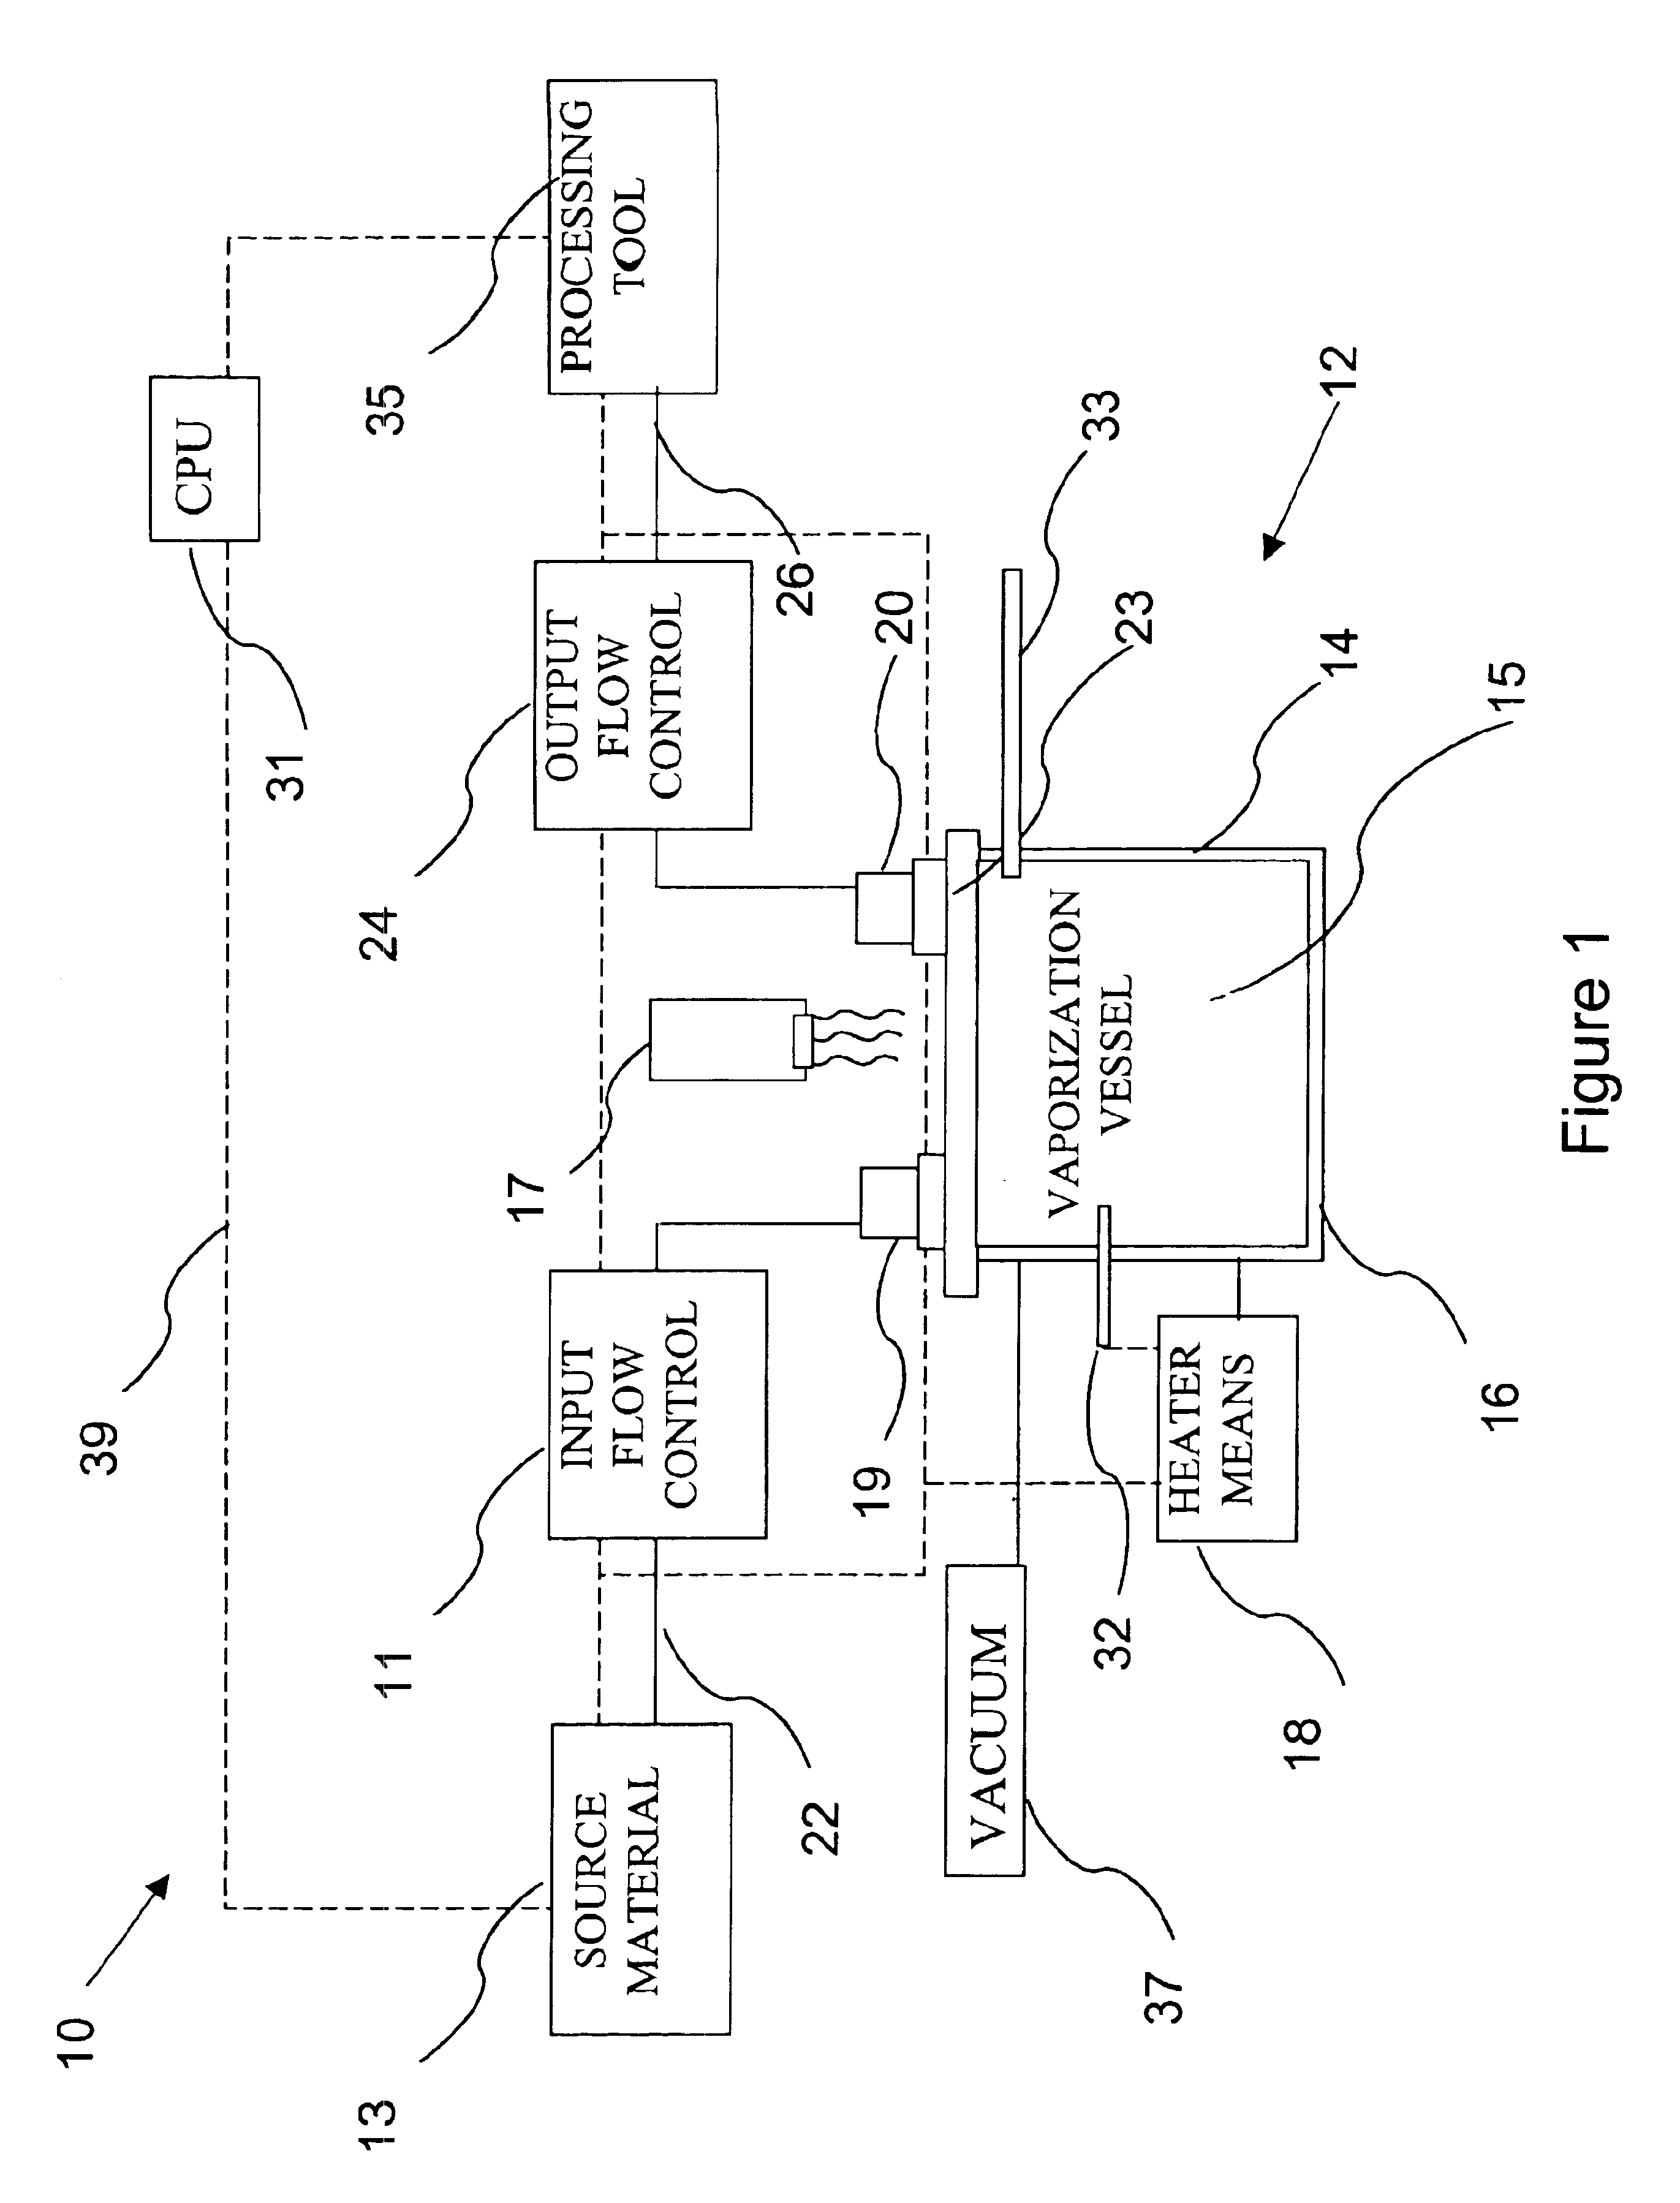 Delivery systems for efficient vaporization of precursor source material